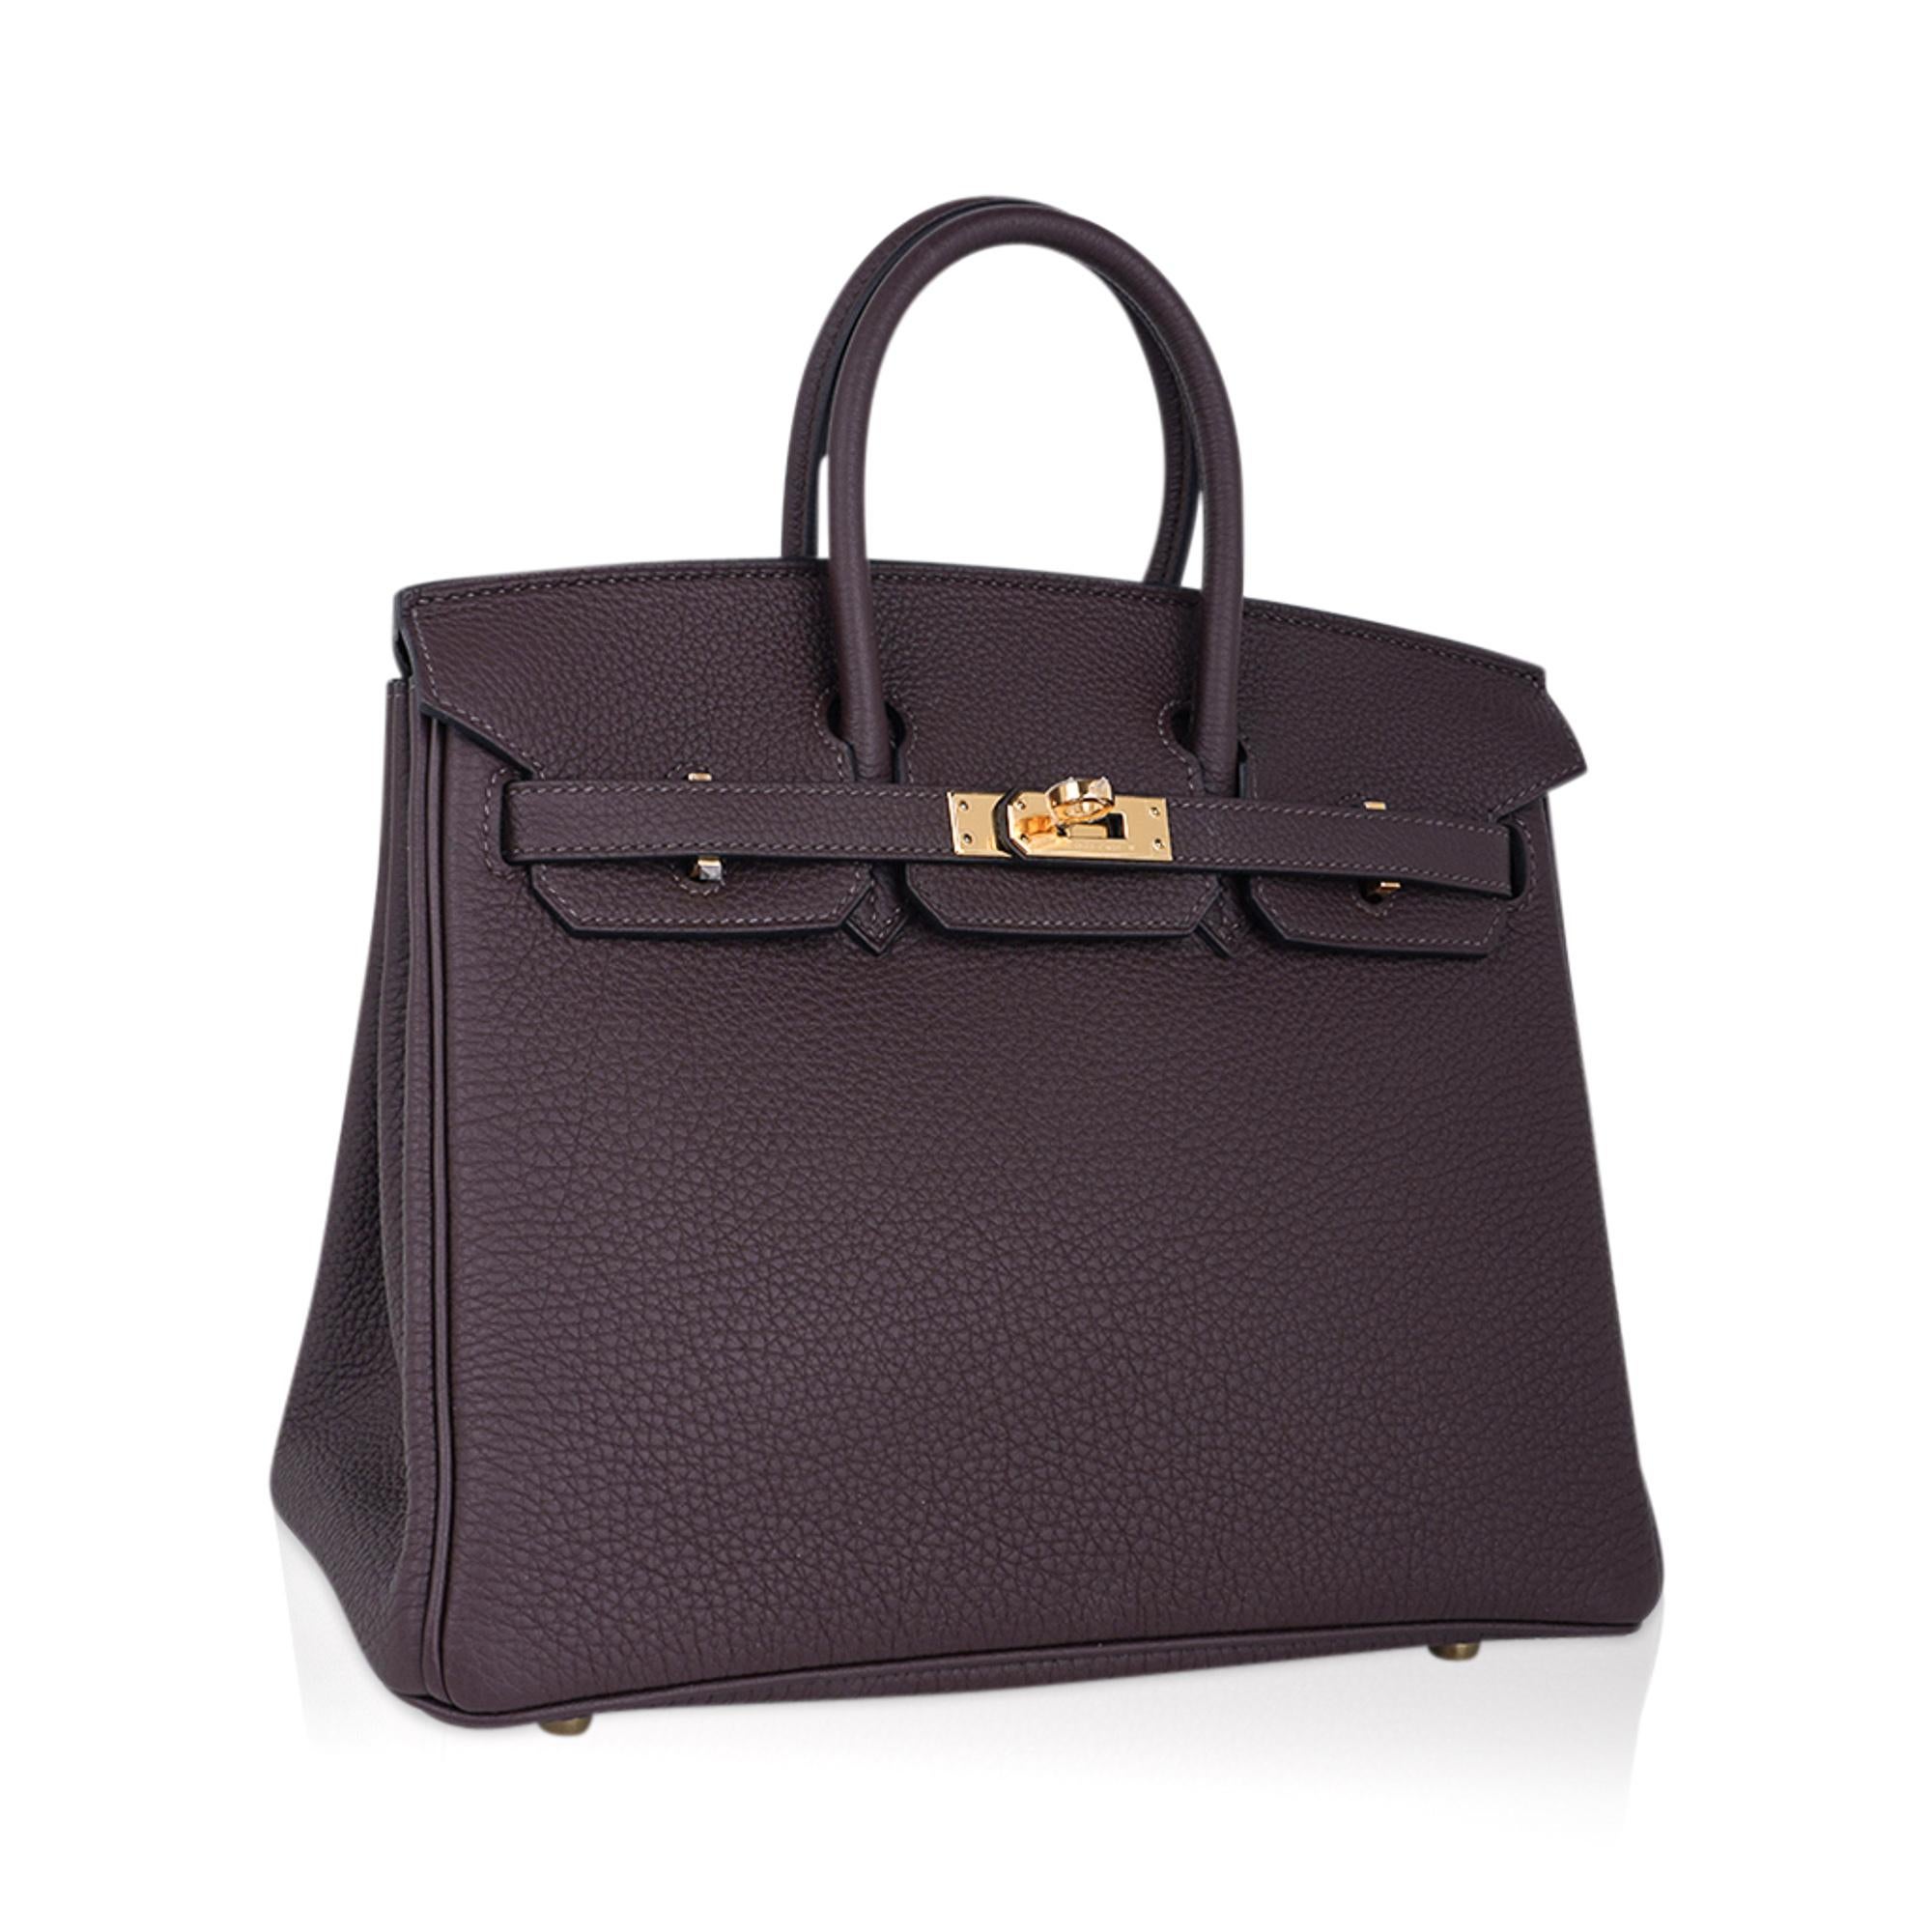 Mightychic offers an Hermes Birkin 25 bag features in delicious Chocolat.
Wear this deep, rich brown like a Black bag.
Rich with Gold hardware this beauty is a chic bag day to evening.
Togo leather is supple to the touch and highly scratch